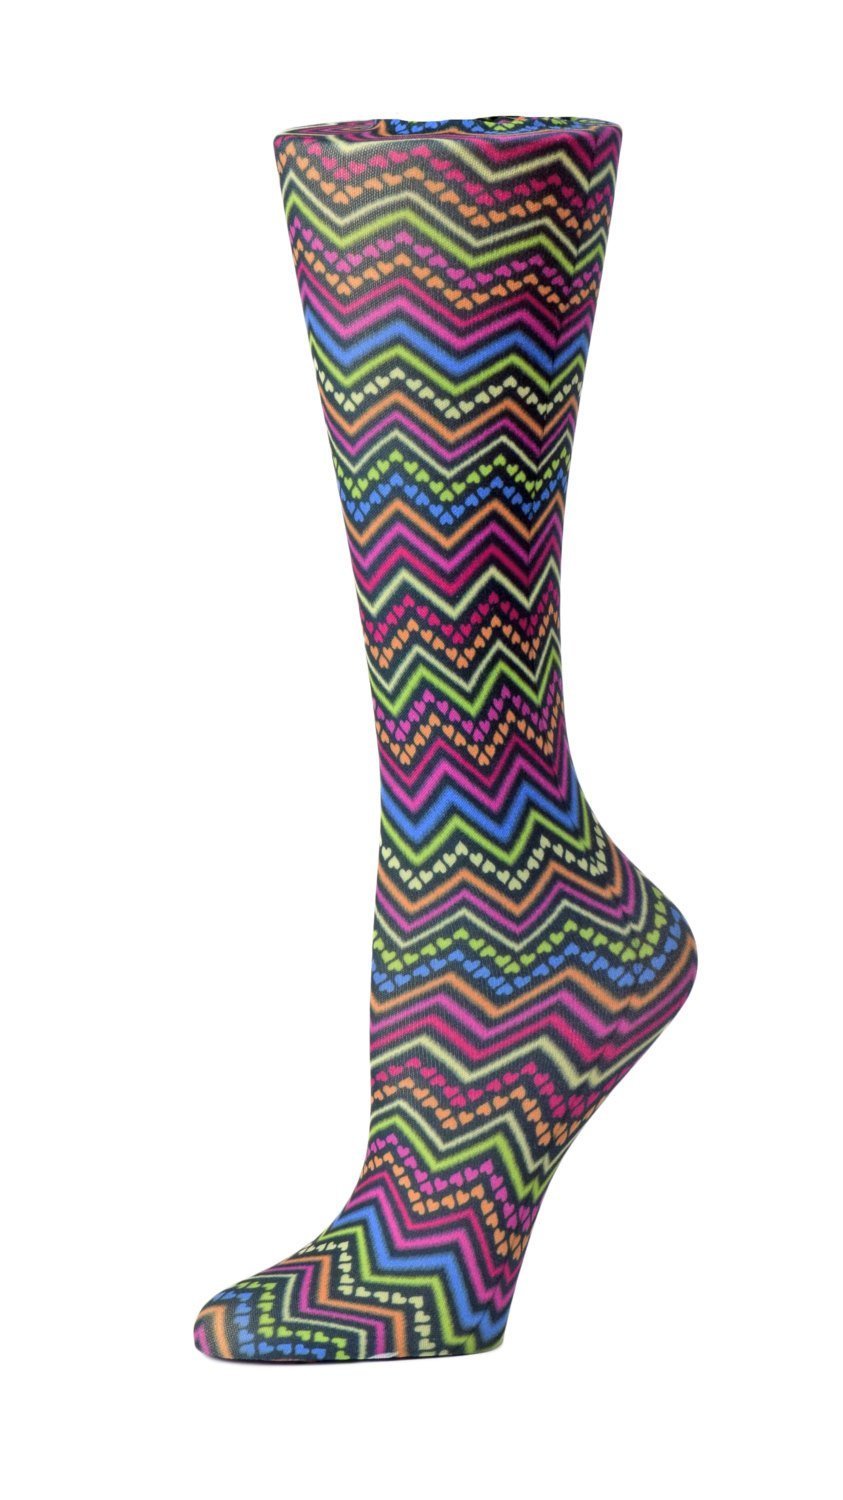 Cutieful Moderate Compression Socks 10-18 MMhg Wide Calf Knit Print Pattern Izzy Hearts at Parker's Clothing and Shoes.